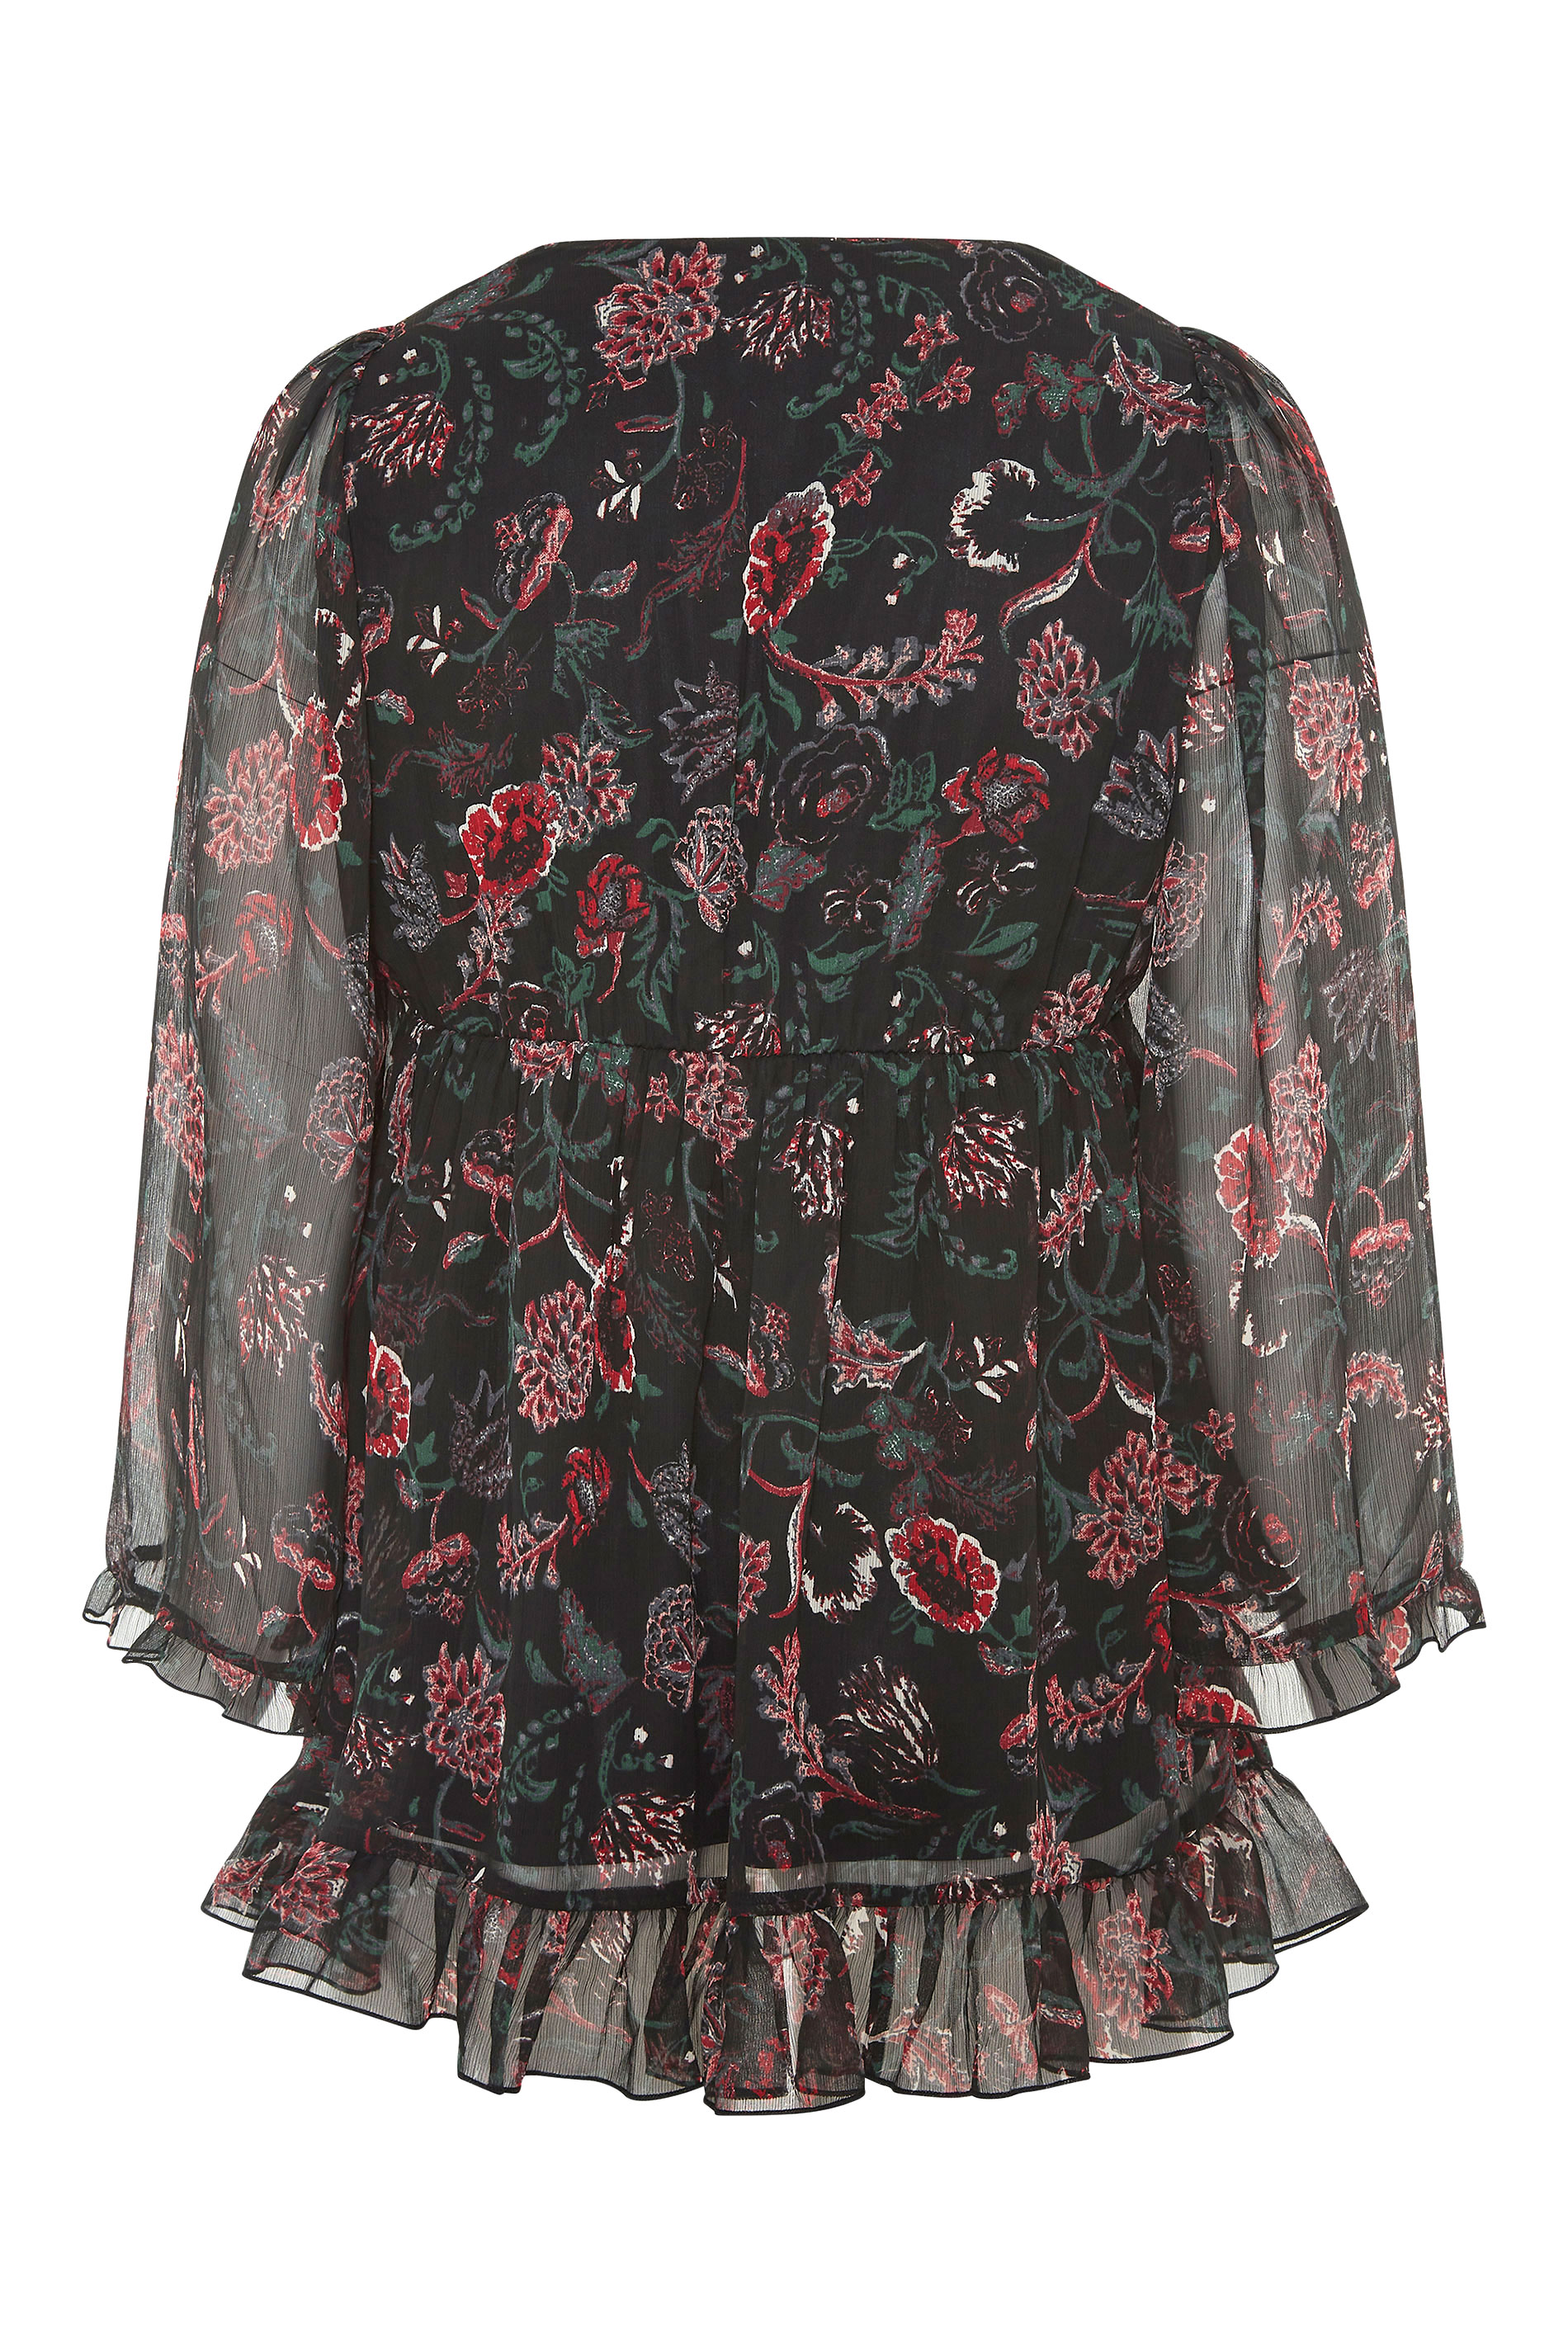 Plus Size YOURS LONDON Black Floral Ruffle Wrap Top | Yours Clothing